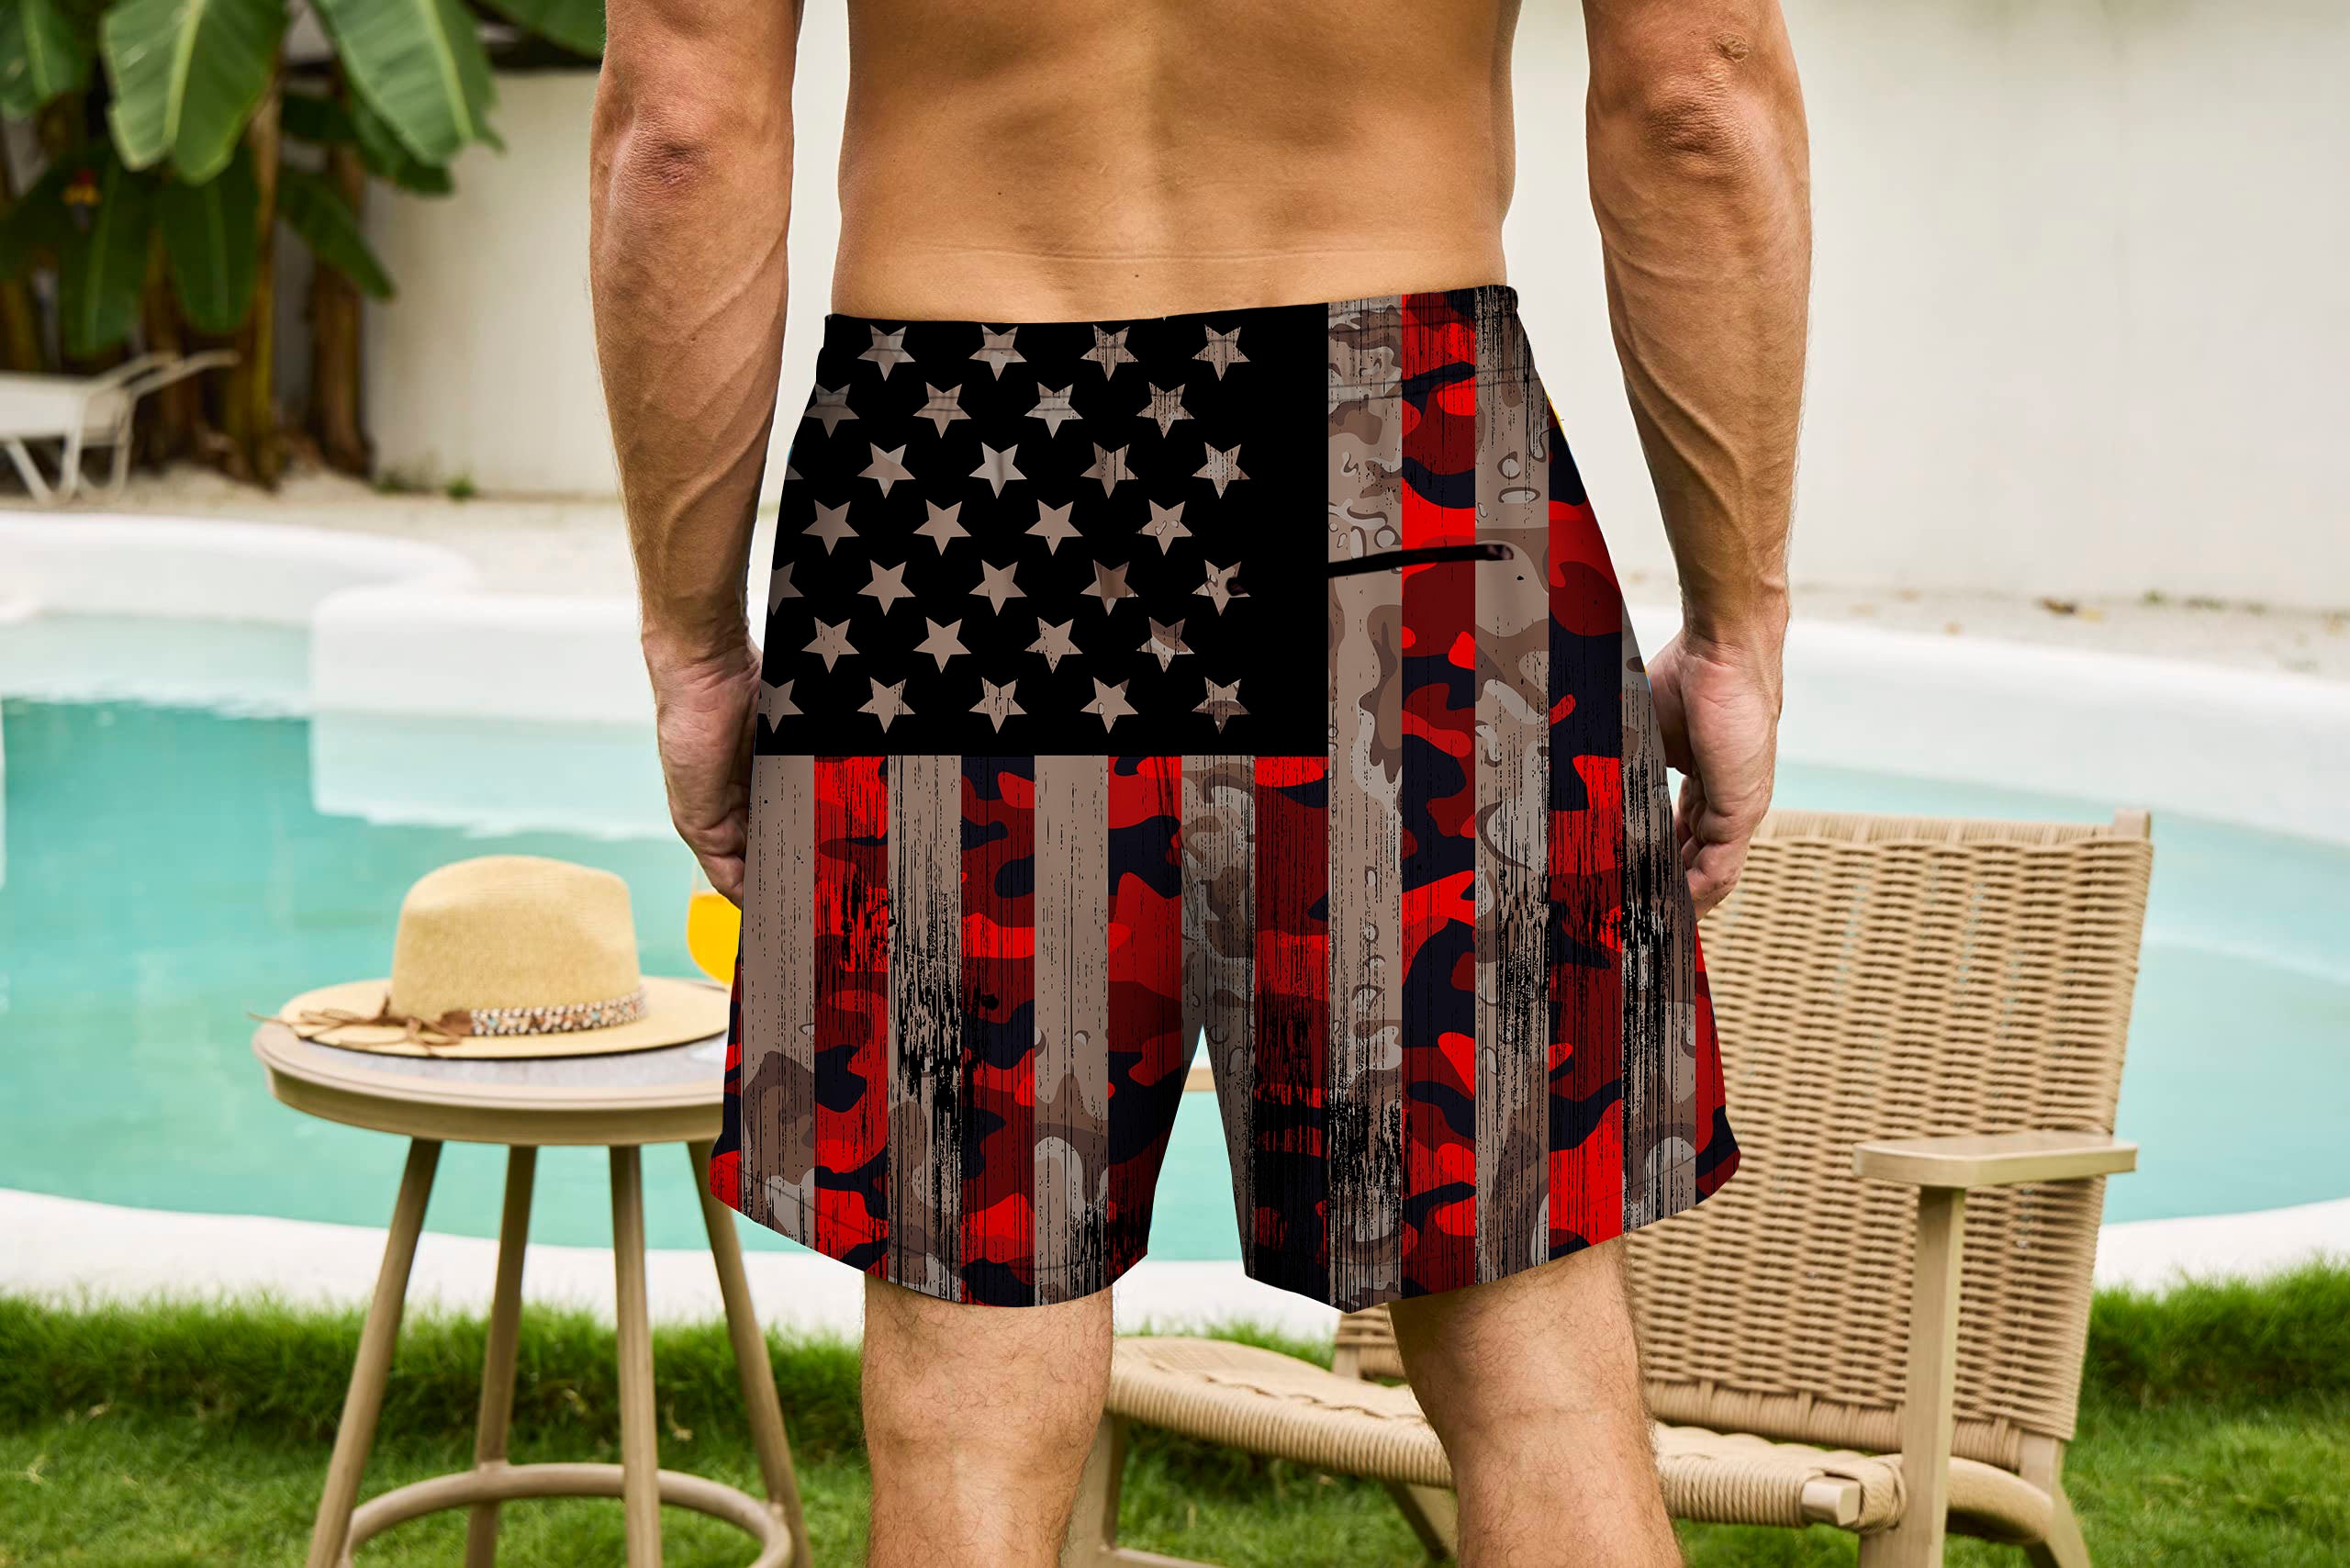 Men's Swim Trunks With Compression Liner 5.5" Inseam Quick Dry Swim Shorts With Pockets - Flag